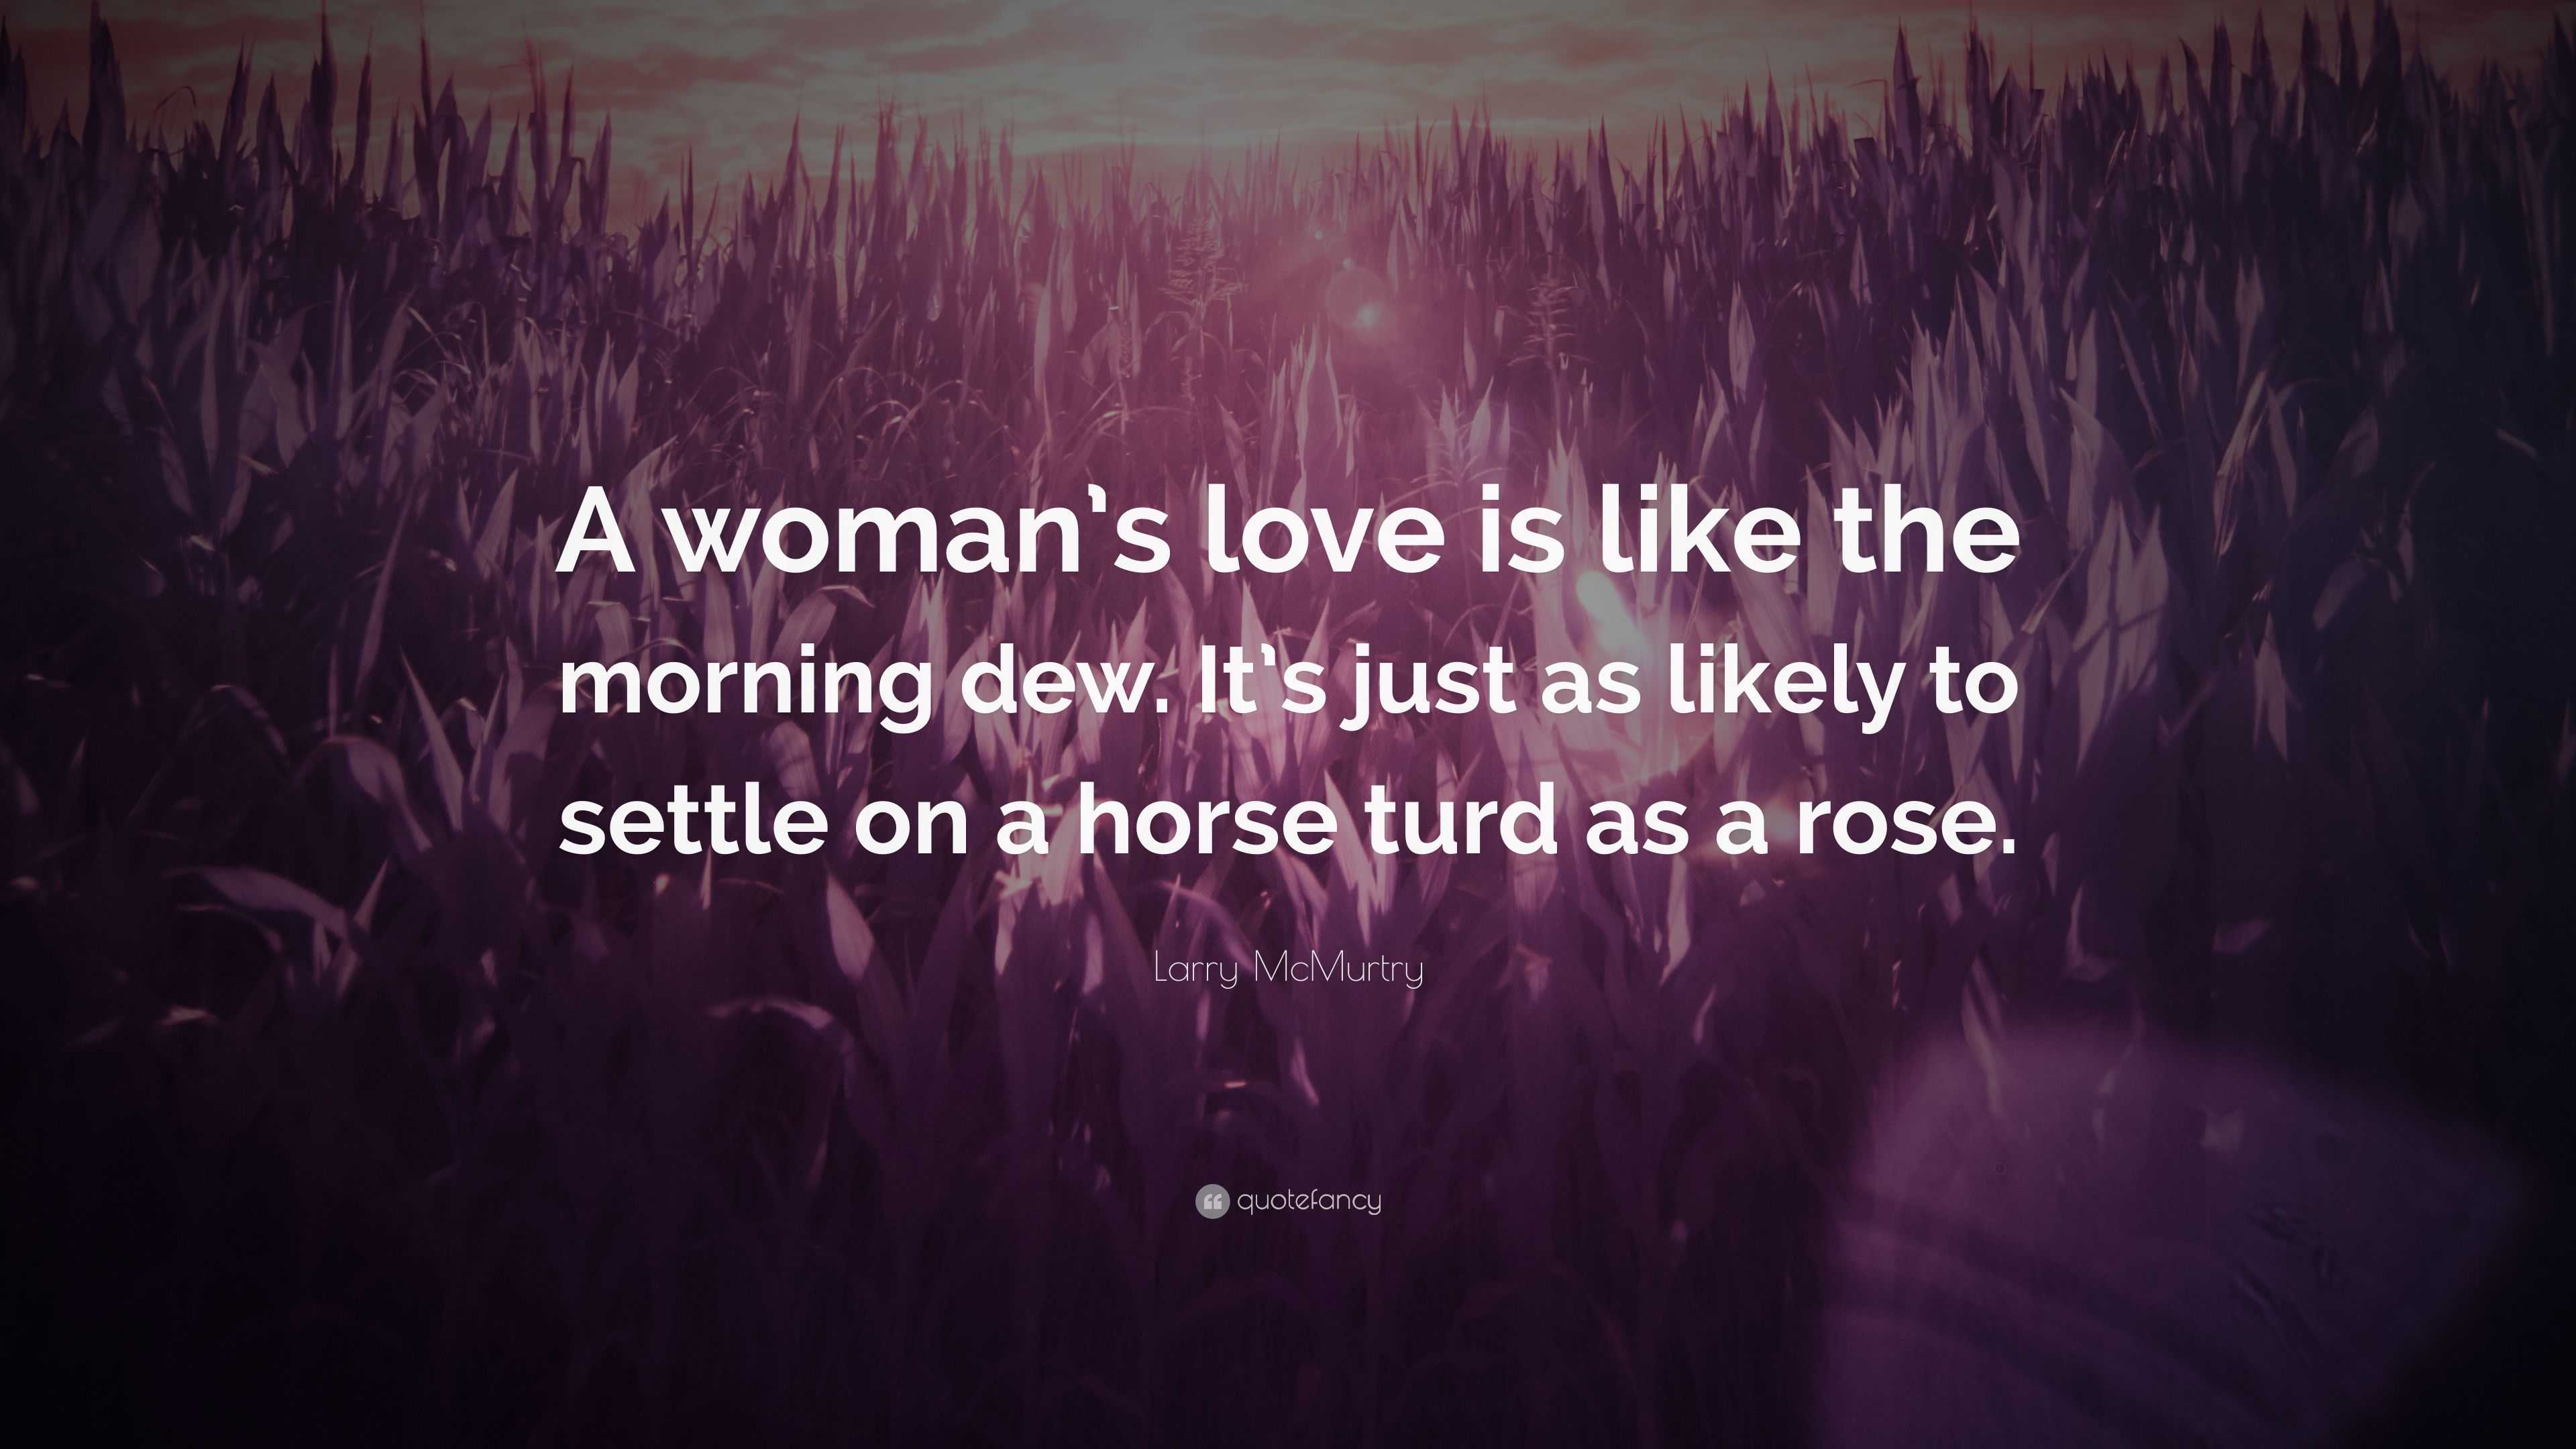 Larry McMurtry Quote: “A woman's love is like the morning dew